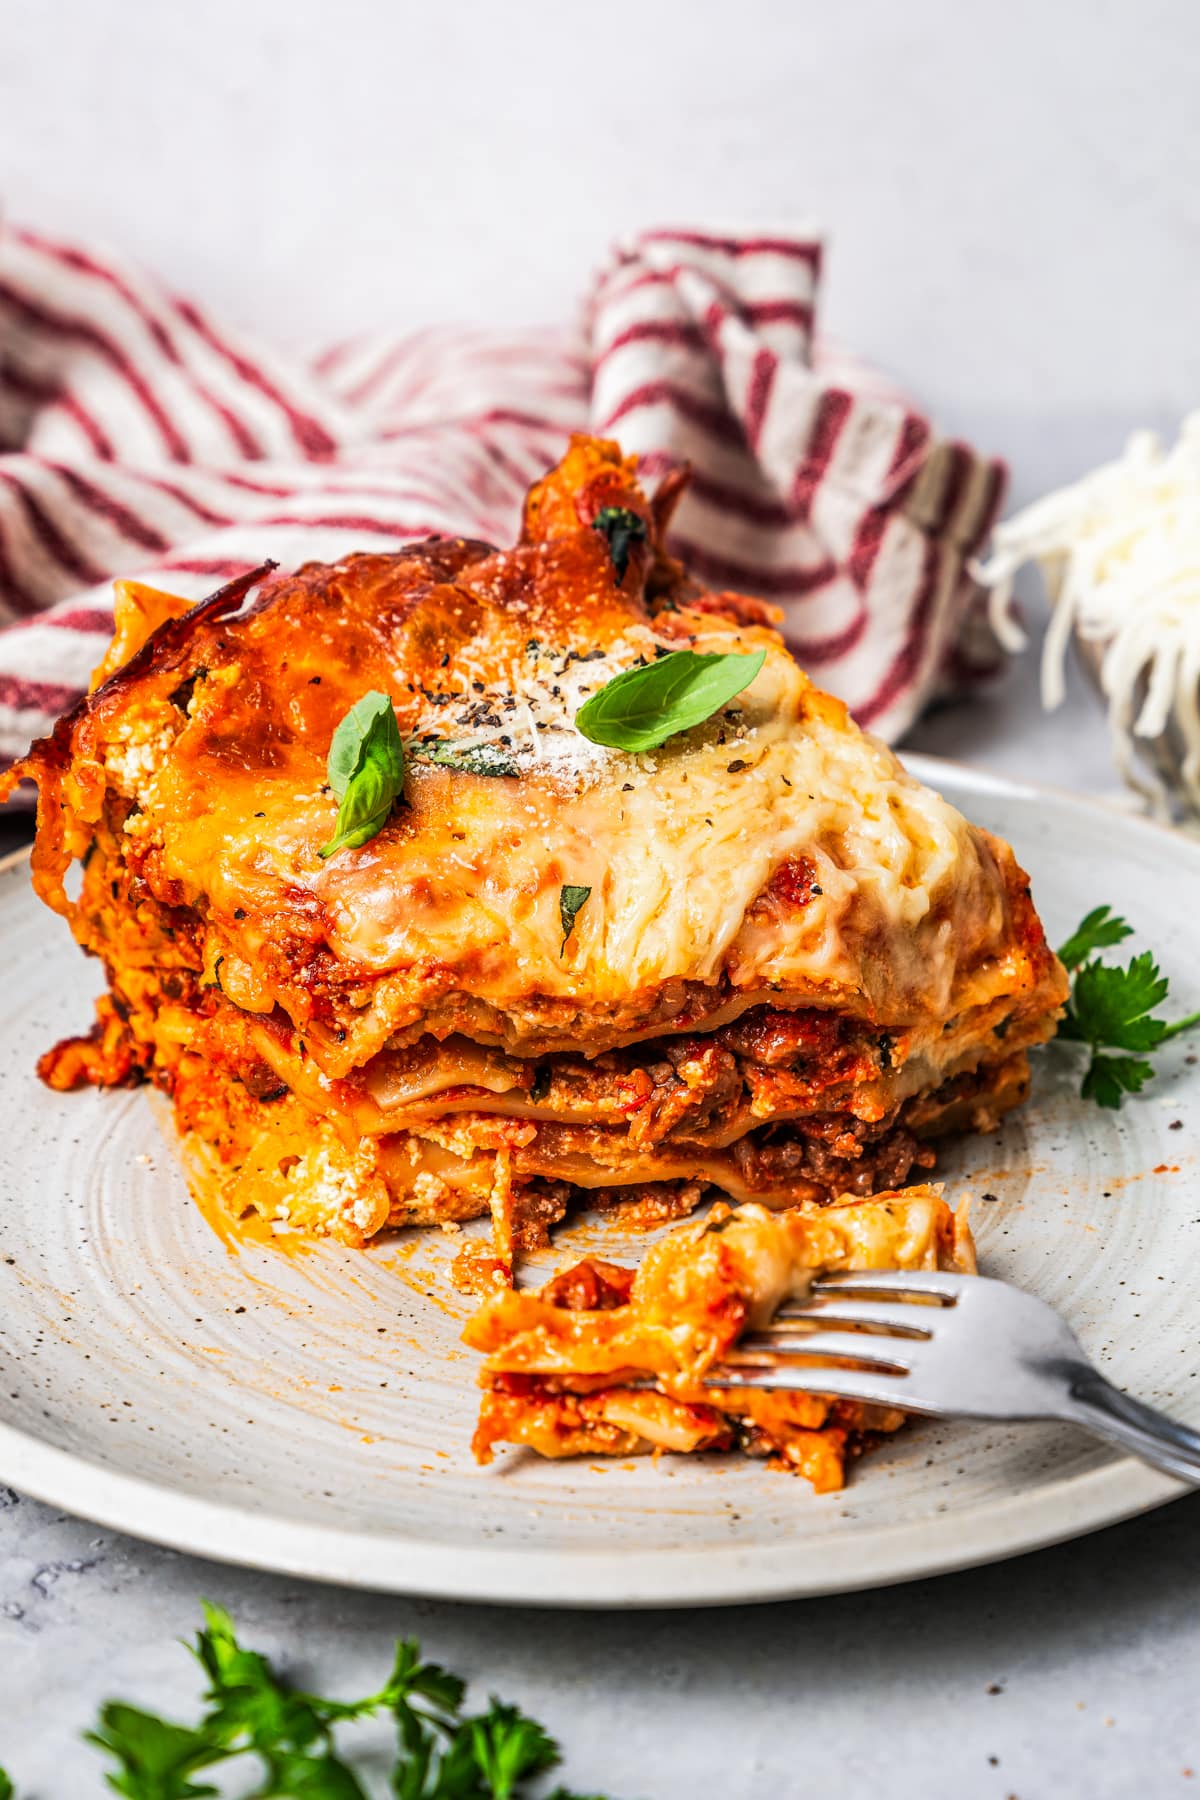 A fork cutting into a piece of lasagna.